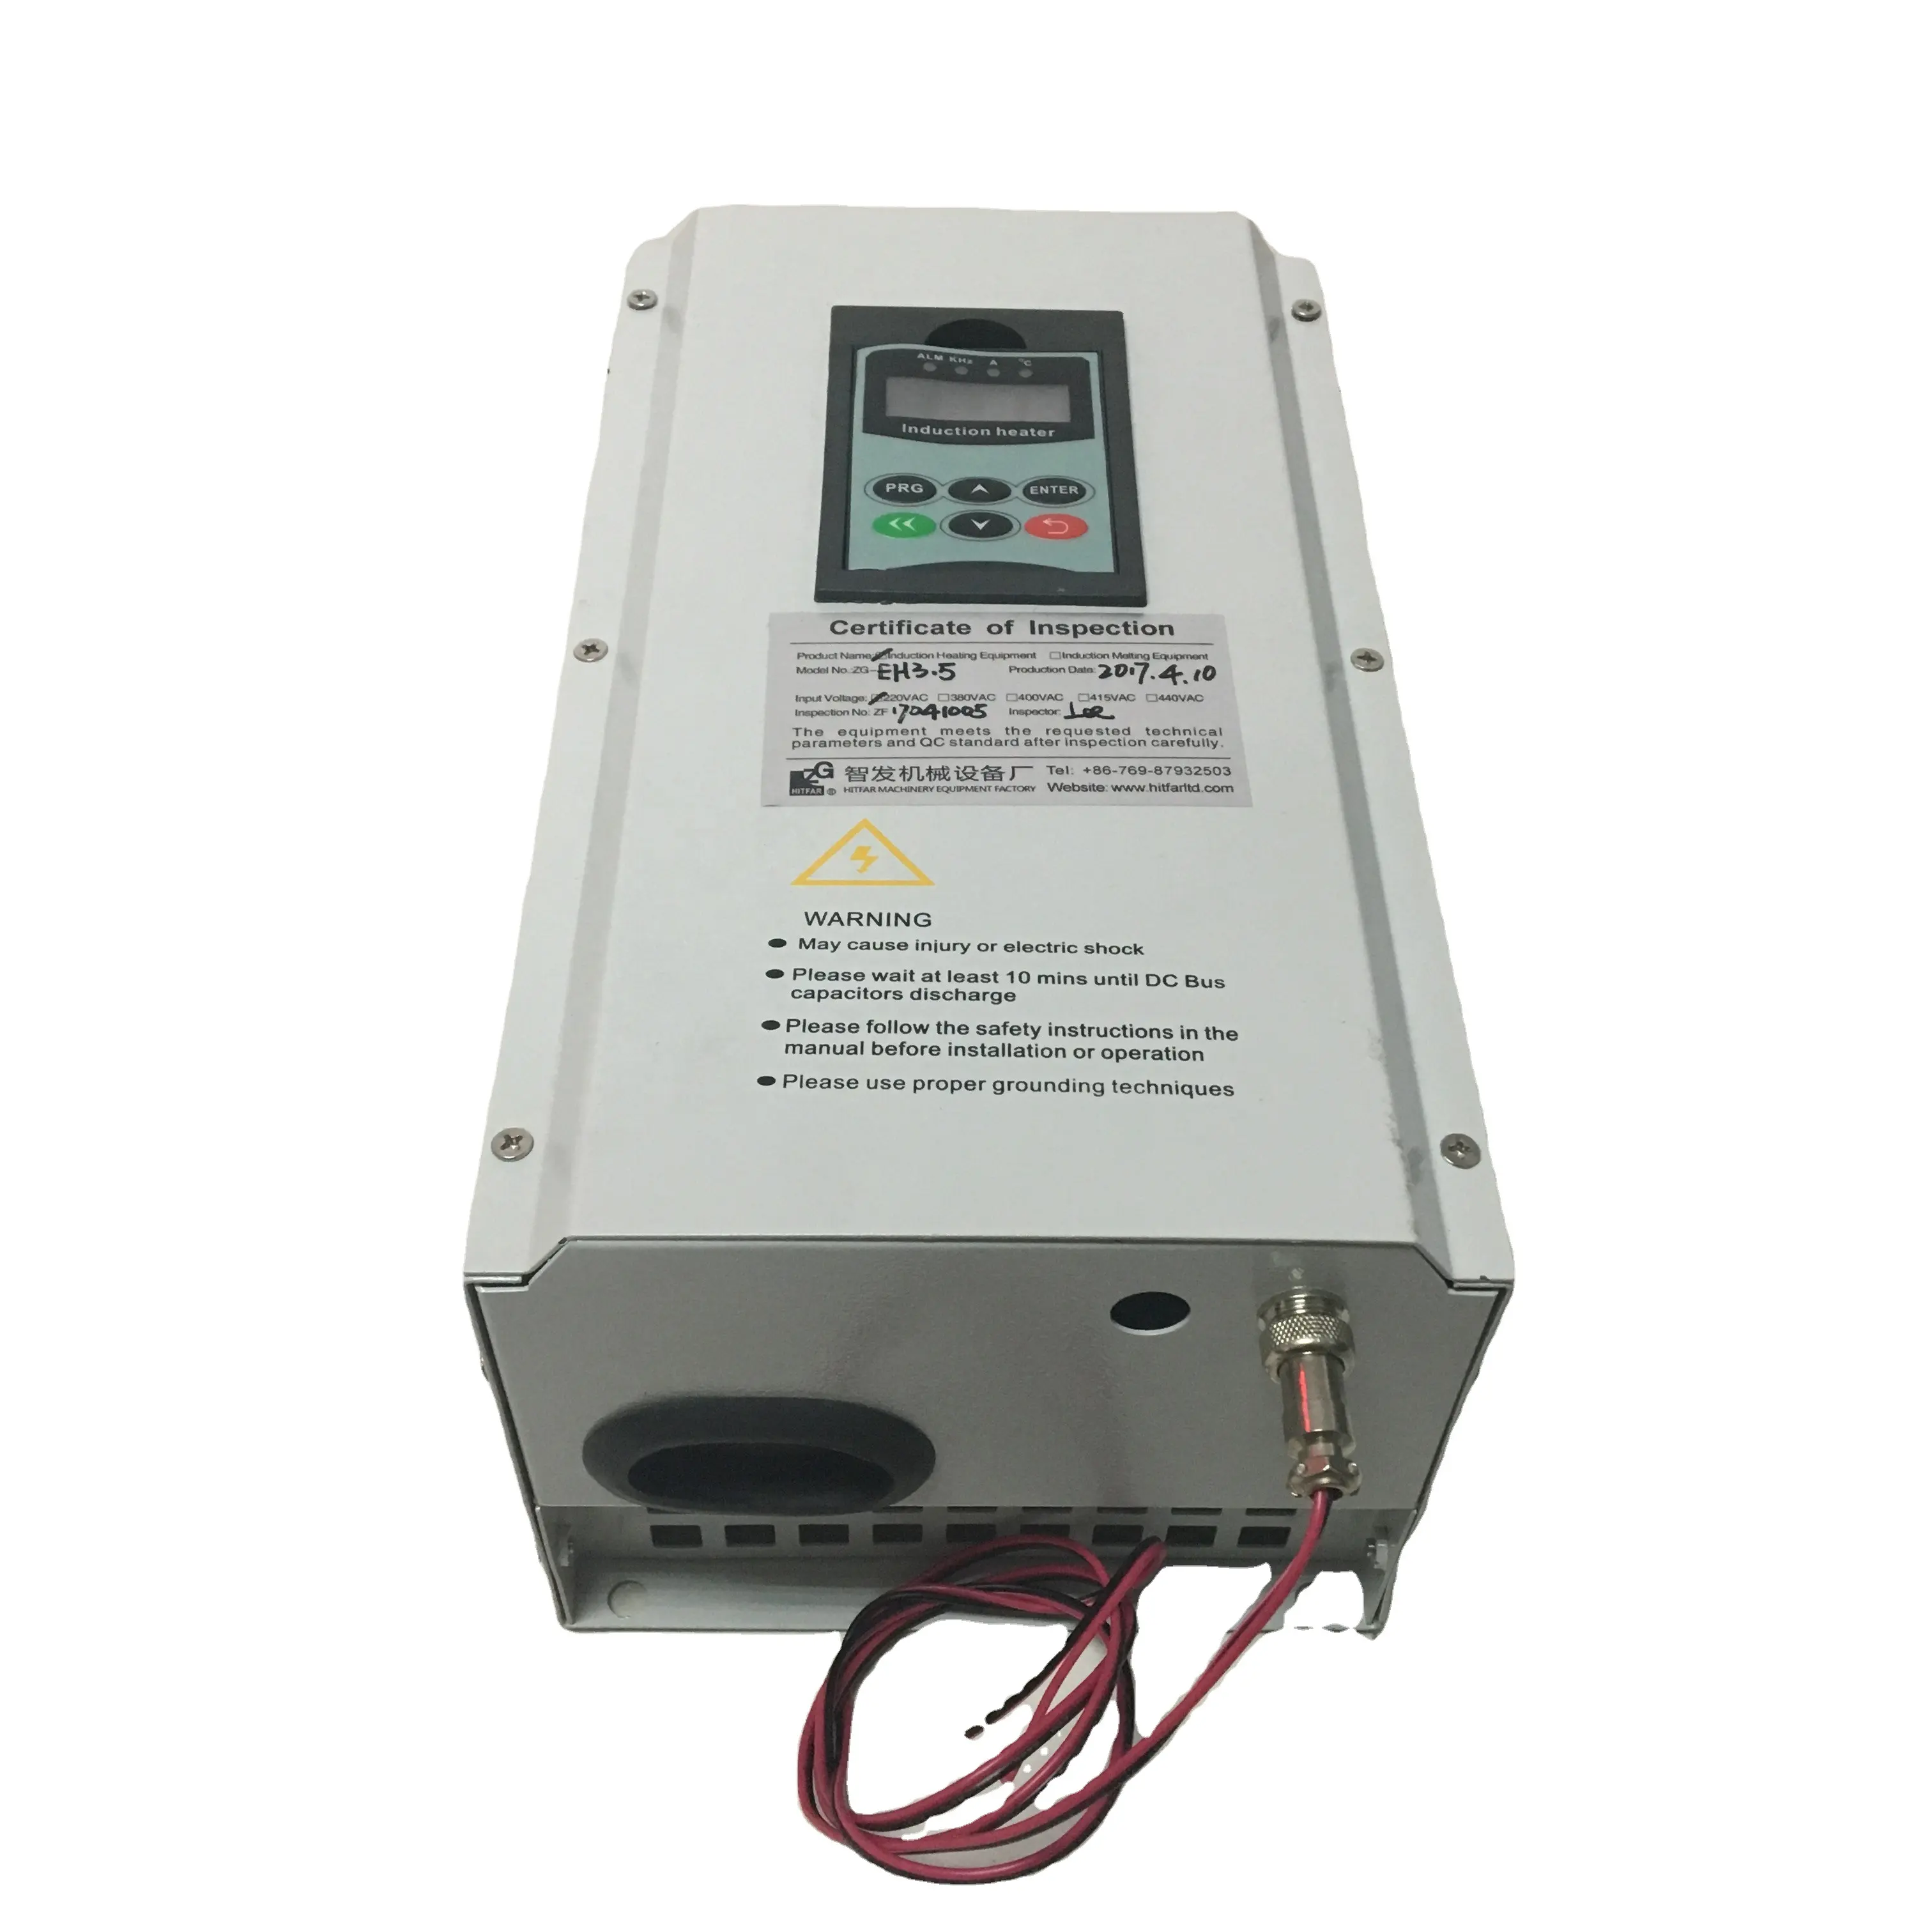 Hitfar Manufacturing Energy Saving zu Least 30 prozent 3.5 KW 220 V 1 P Electromagnetic Induction Heater